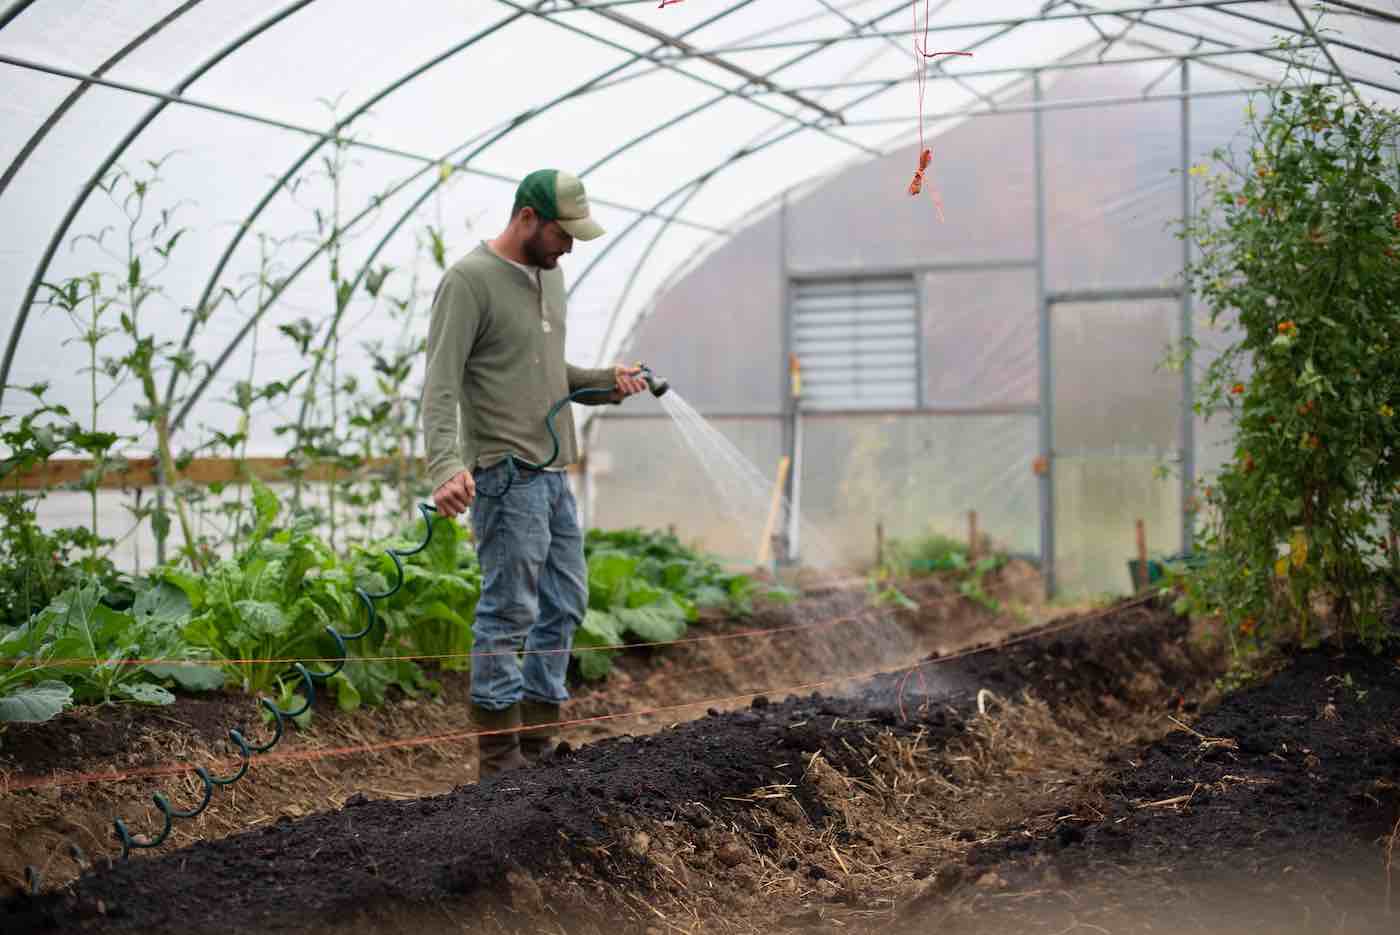 Man watering his plants in a greenhouse on a homestead.